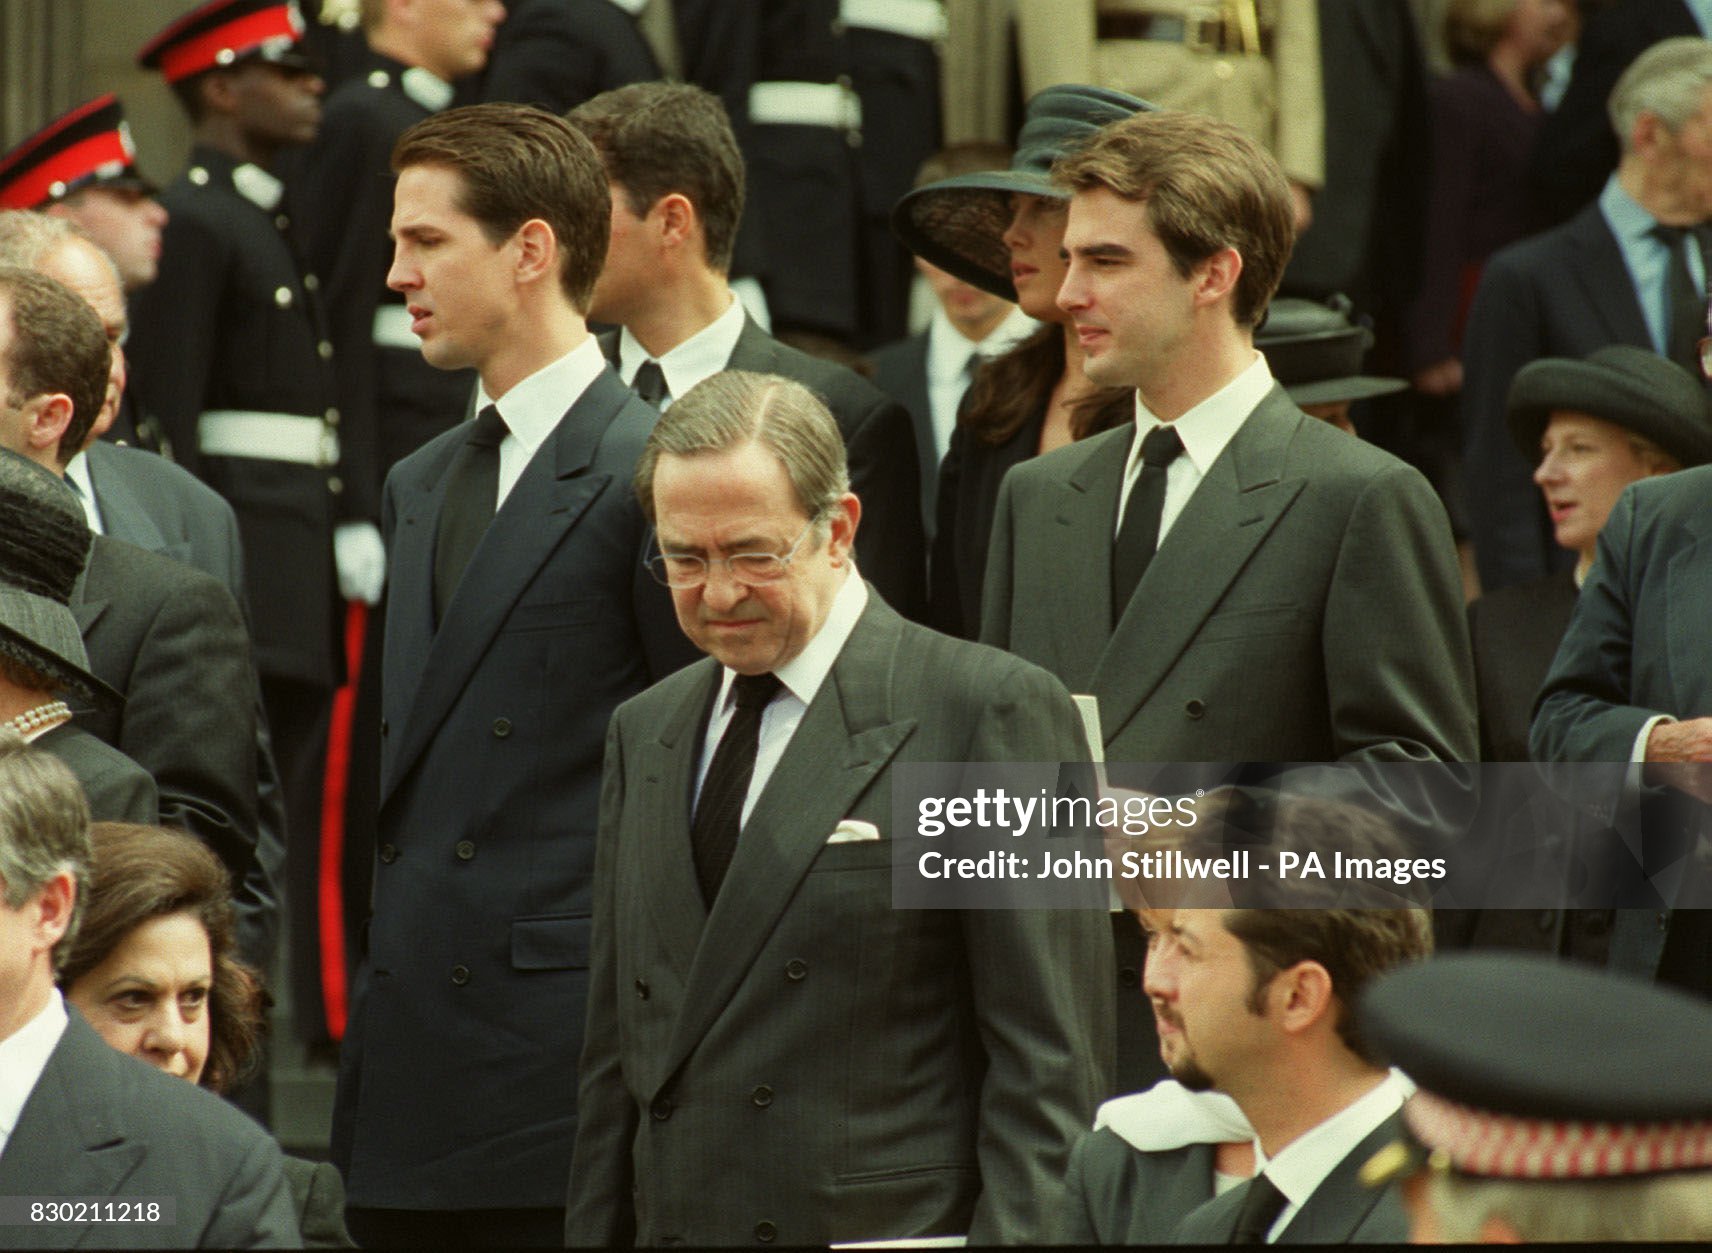 king-constantine-of-greece-at-the-memorial-service-for-the-late-king-hussein-of-jordan-at-st.jpg